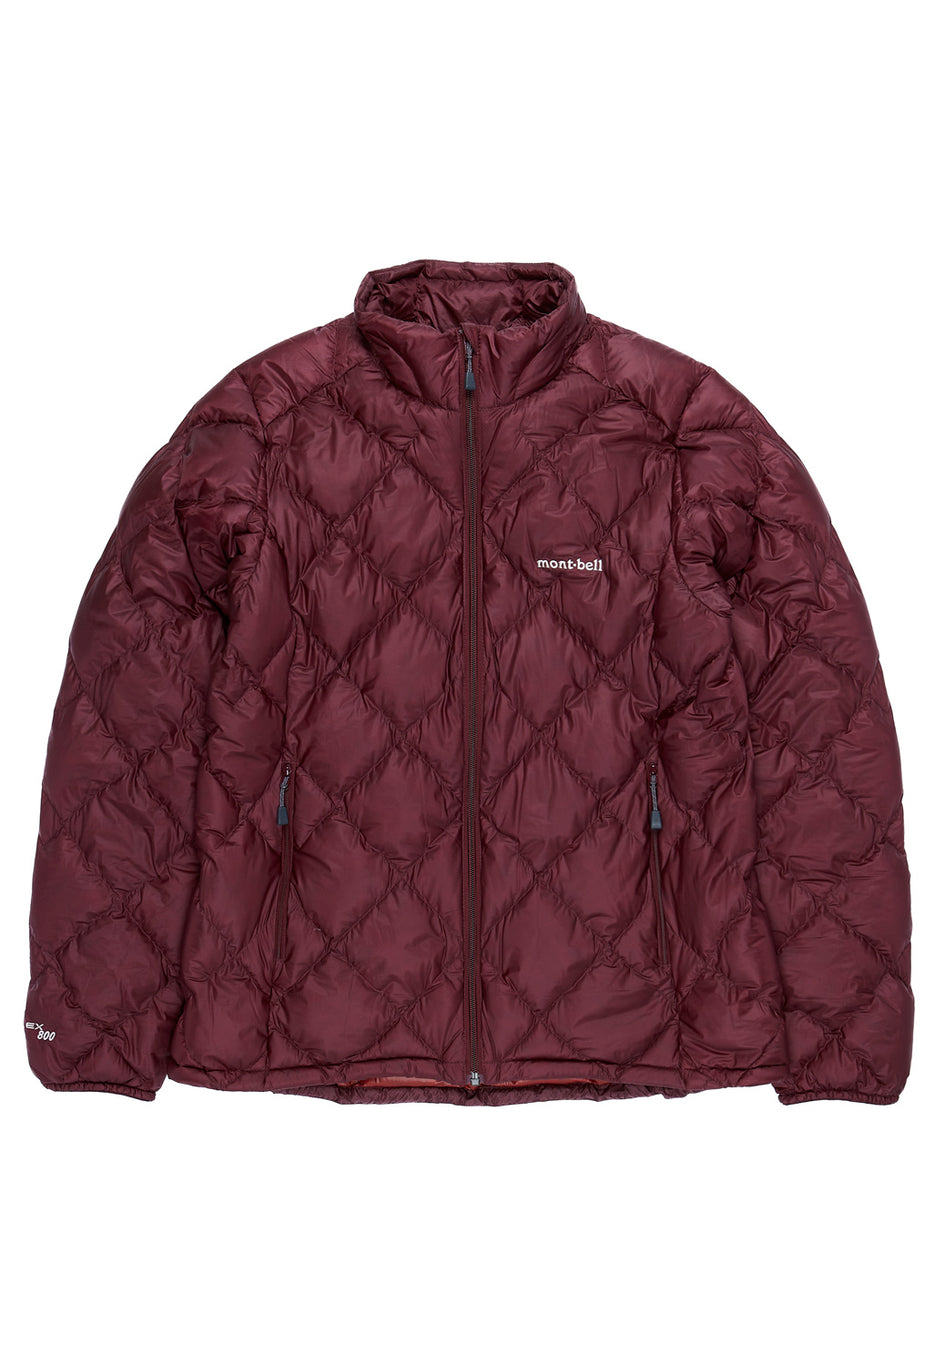 Montbell Women's Superior Down Jacket - Wine Red